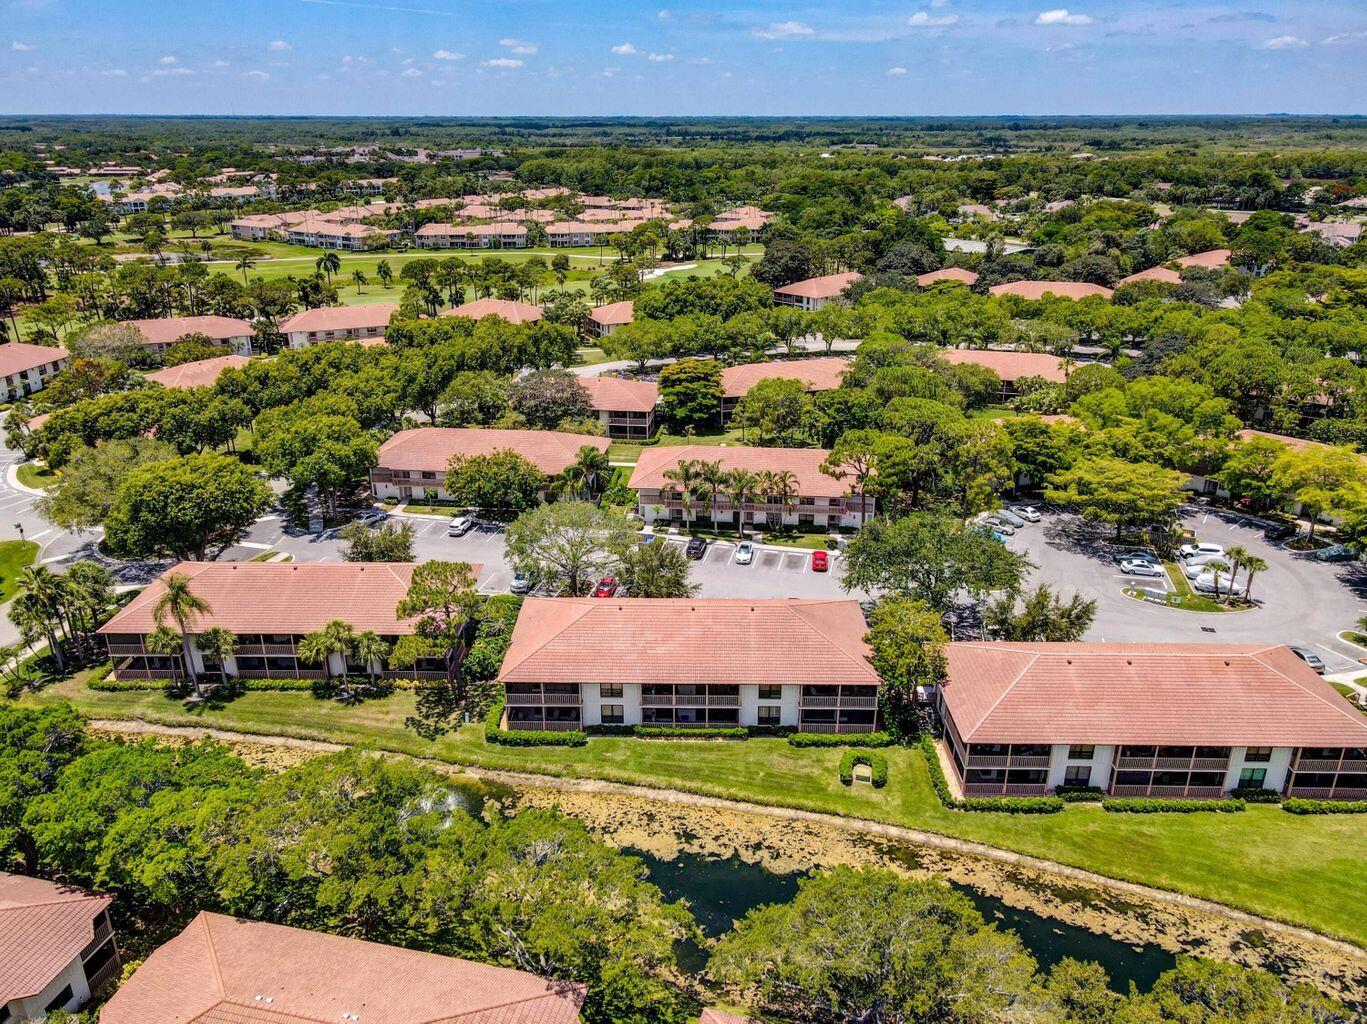 Ideal location, first floor end unit, canal view in the Golf Villas.  This unit was well cared for by the long time owner, but it is in need of updating.  Wrap around, covered and screened patio overlooks a serene canal with fountain.  Close to community pool and walking distance to the hotel and spa.